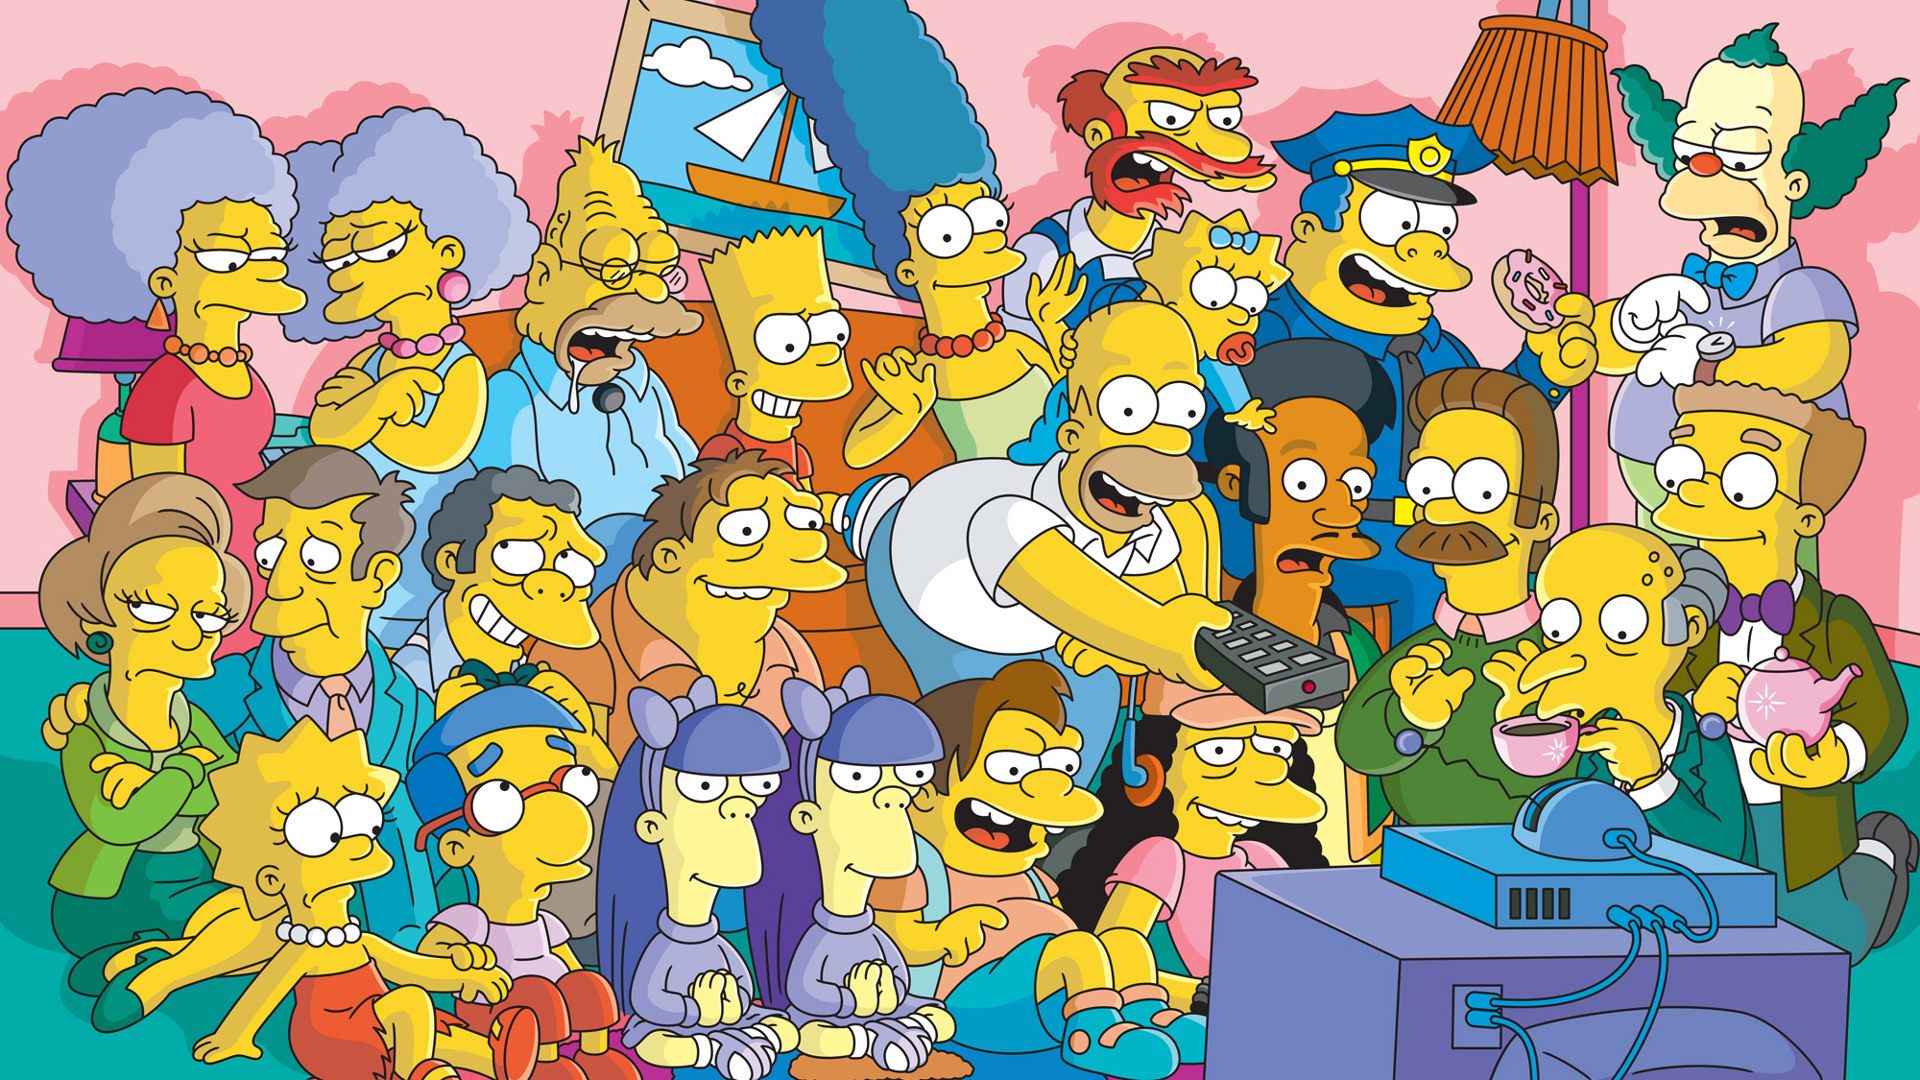 Watch The Entire Simpsons Series On New World App